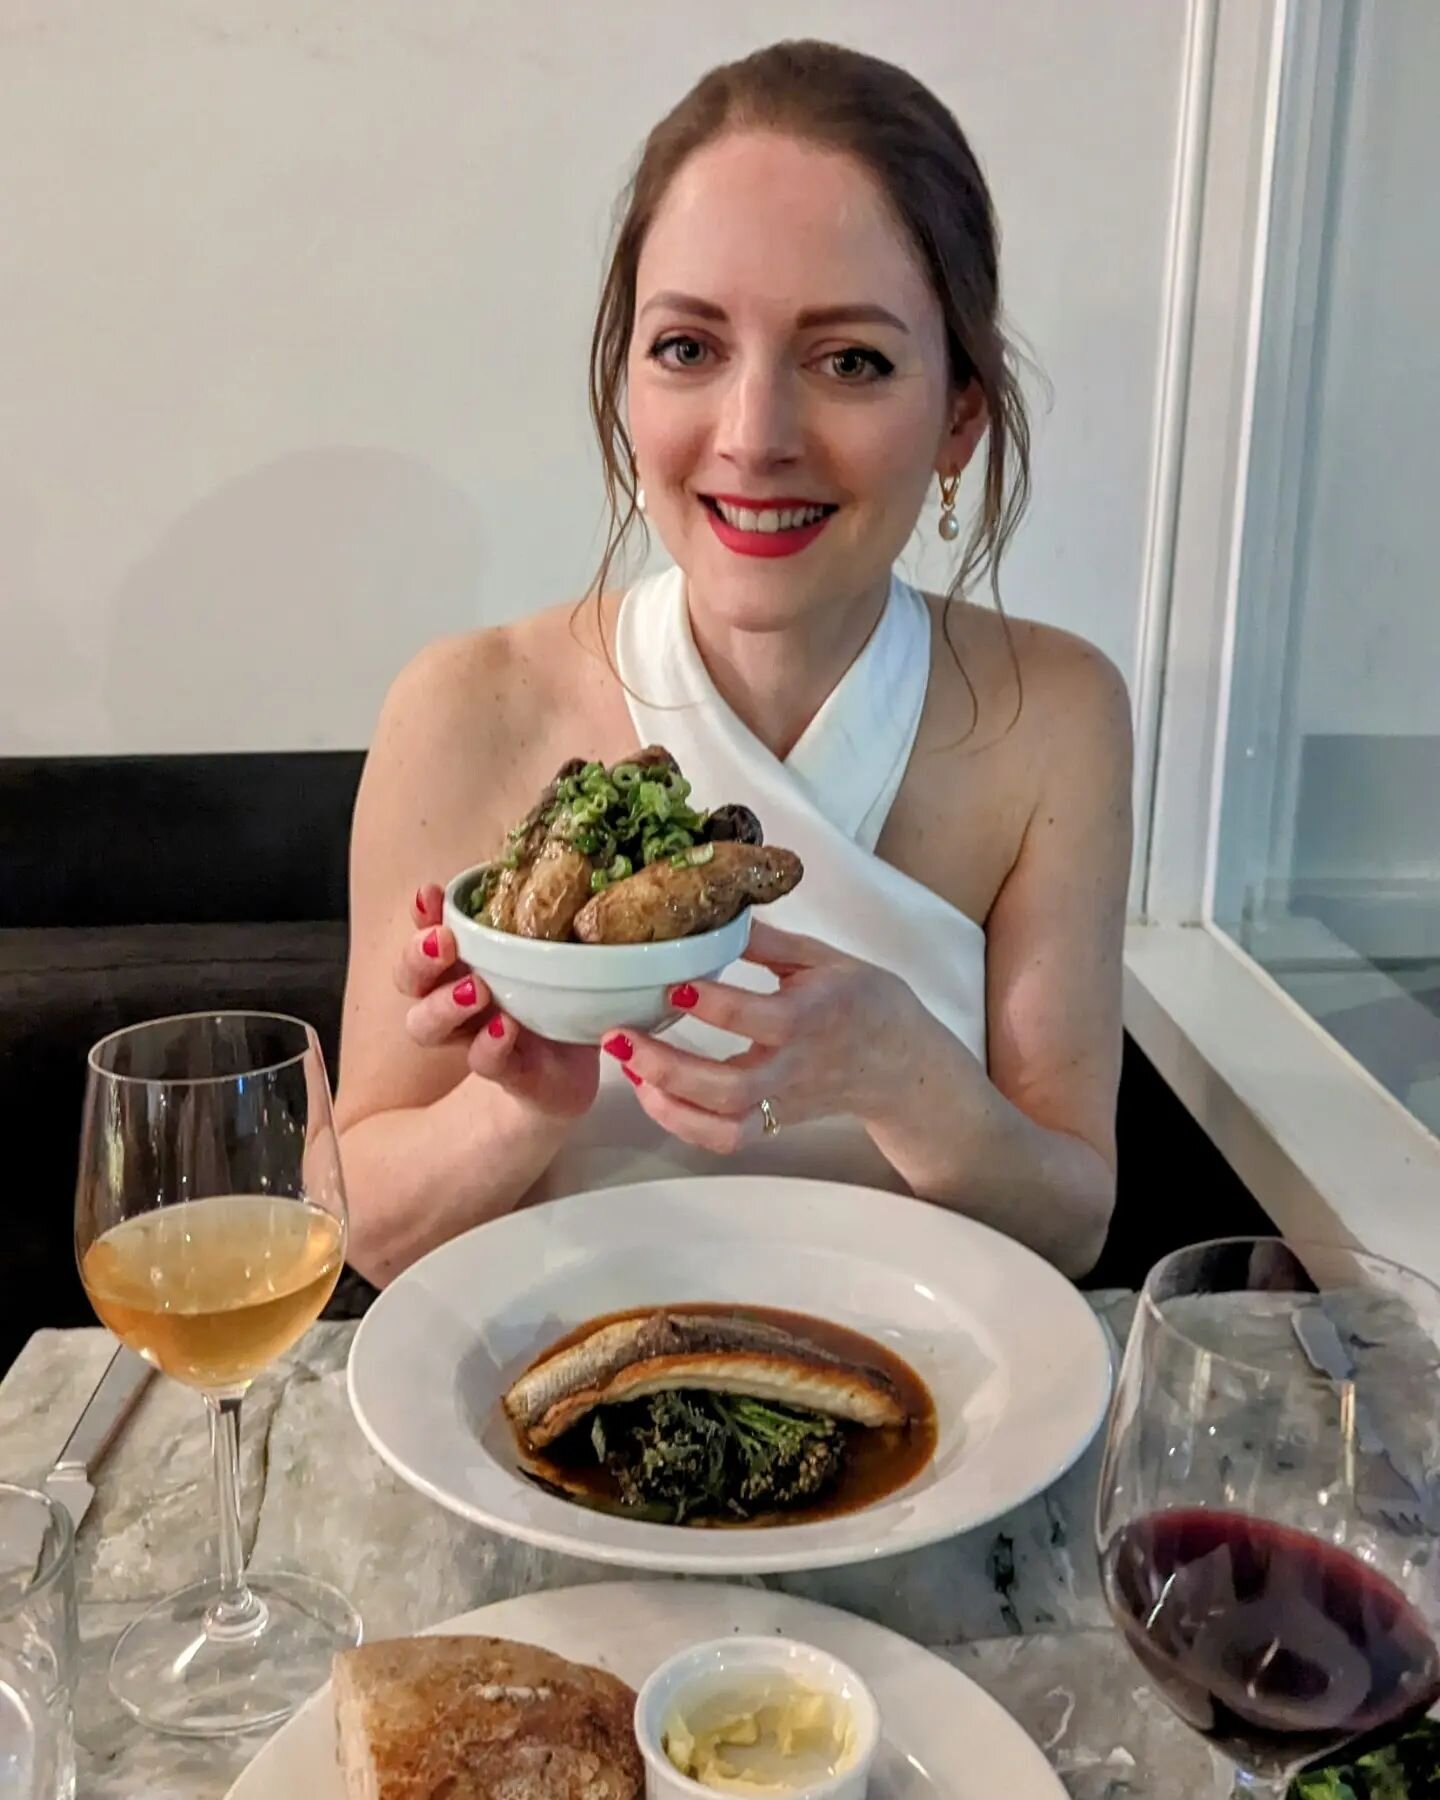 One week ago. One of the best meals of my life at @angelas_of_margate with my brand new husband, the one I fell in love with over a series of magnificent meals. Every dish was terrific and I even managed not to spill crab bisque on my wedding dress. 